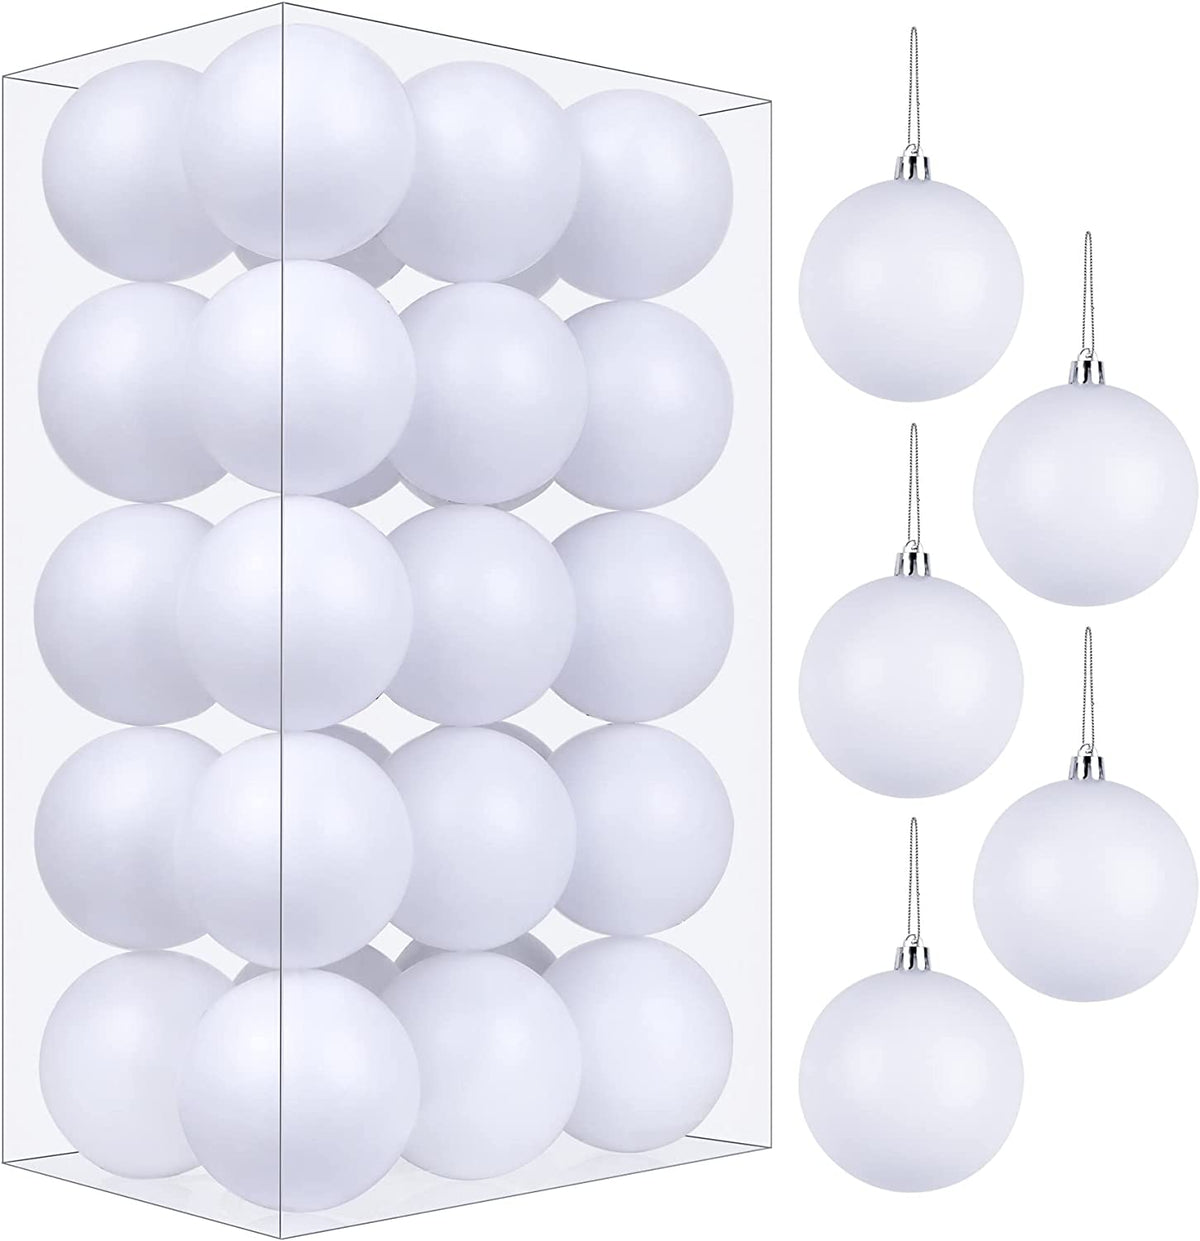 SHareconn 60mm-80mm Christmas Ball Ornaments,12-30pcs Blank White Shatterproof Plastic Decorative Baubles Set with Hang Rope for DIY Craft Activities, Xmas Tree Decor, Holiday Party Wedding Decoration